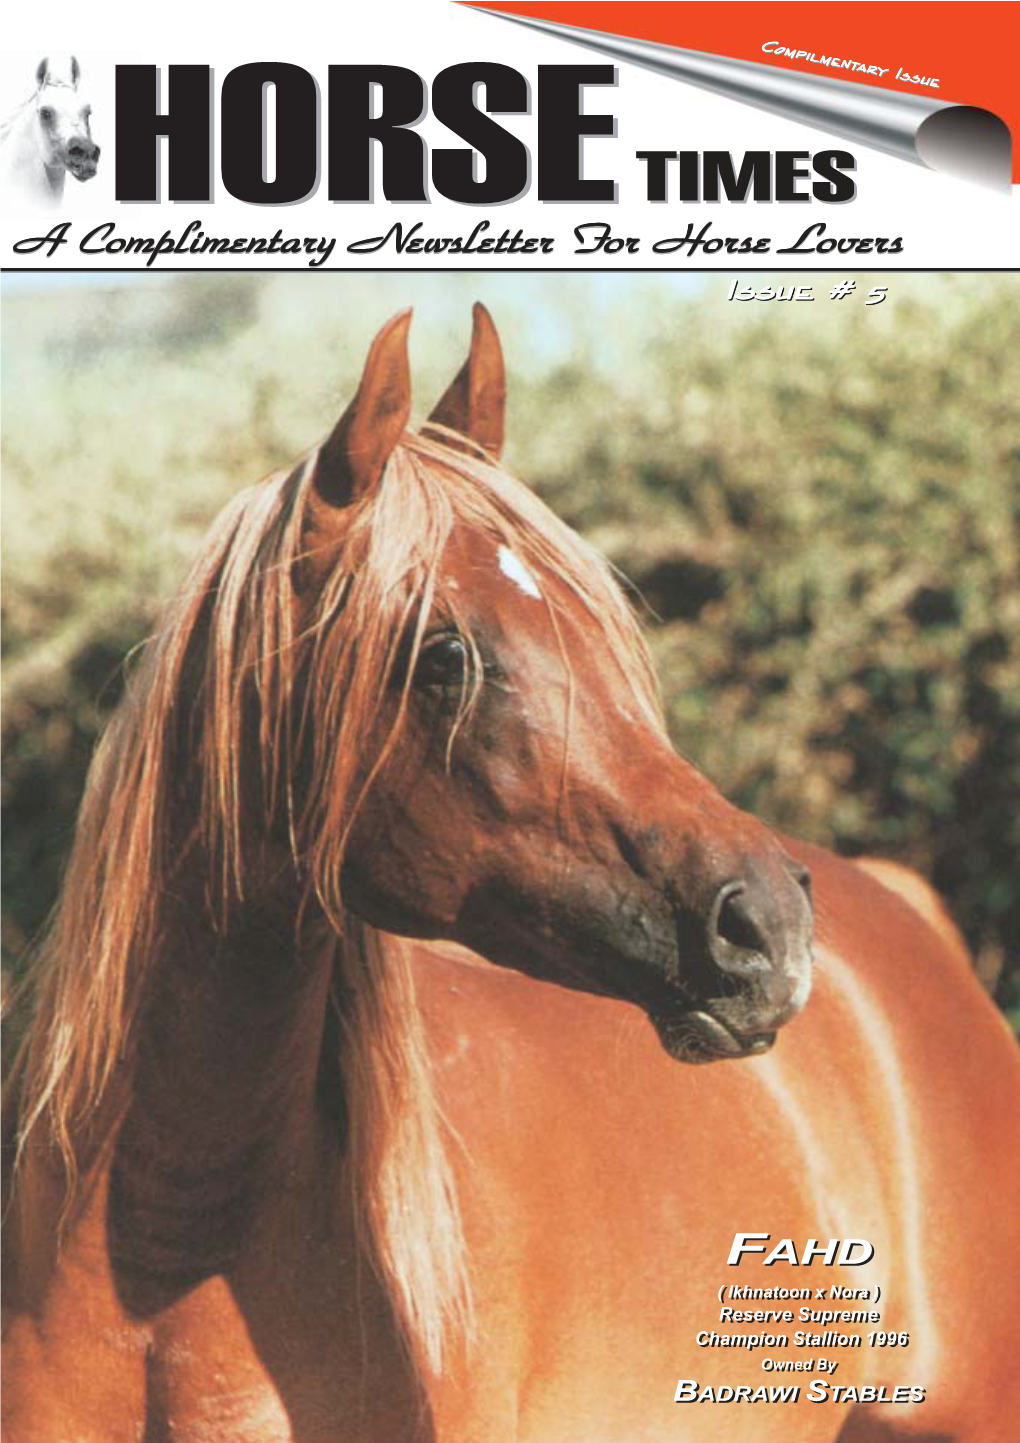 The Egyptian Arabian Horse Breeders Association (EAHBA) Was Founded by a Group of Zealous Breeders in 1986